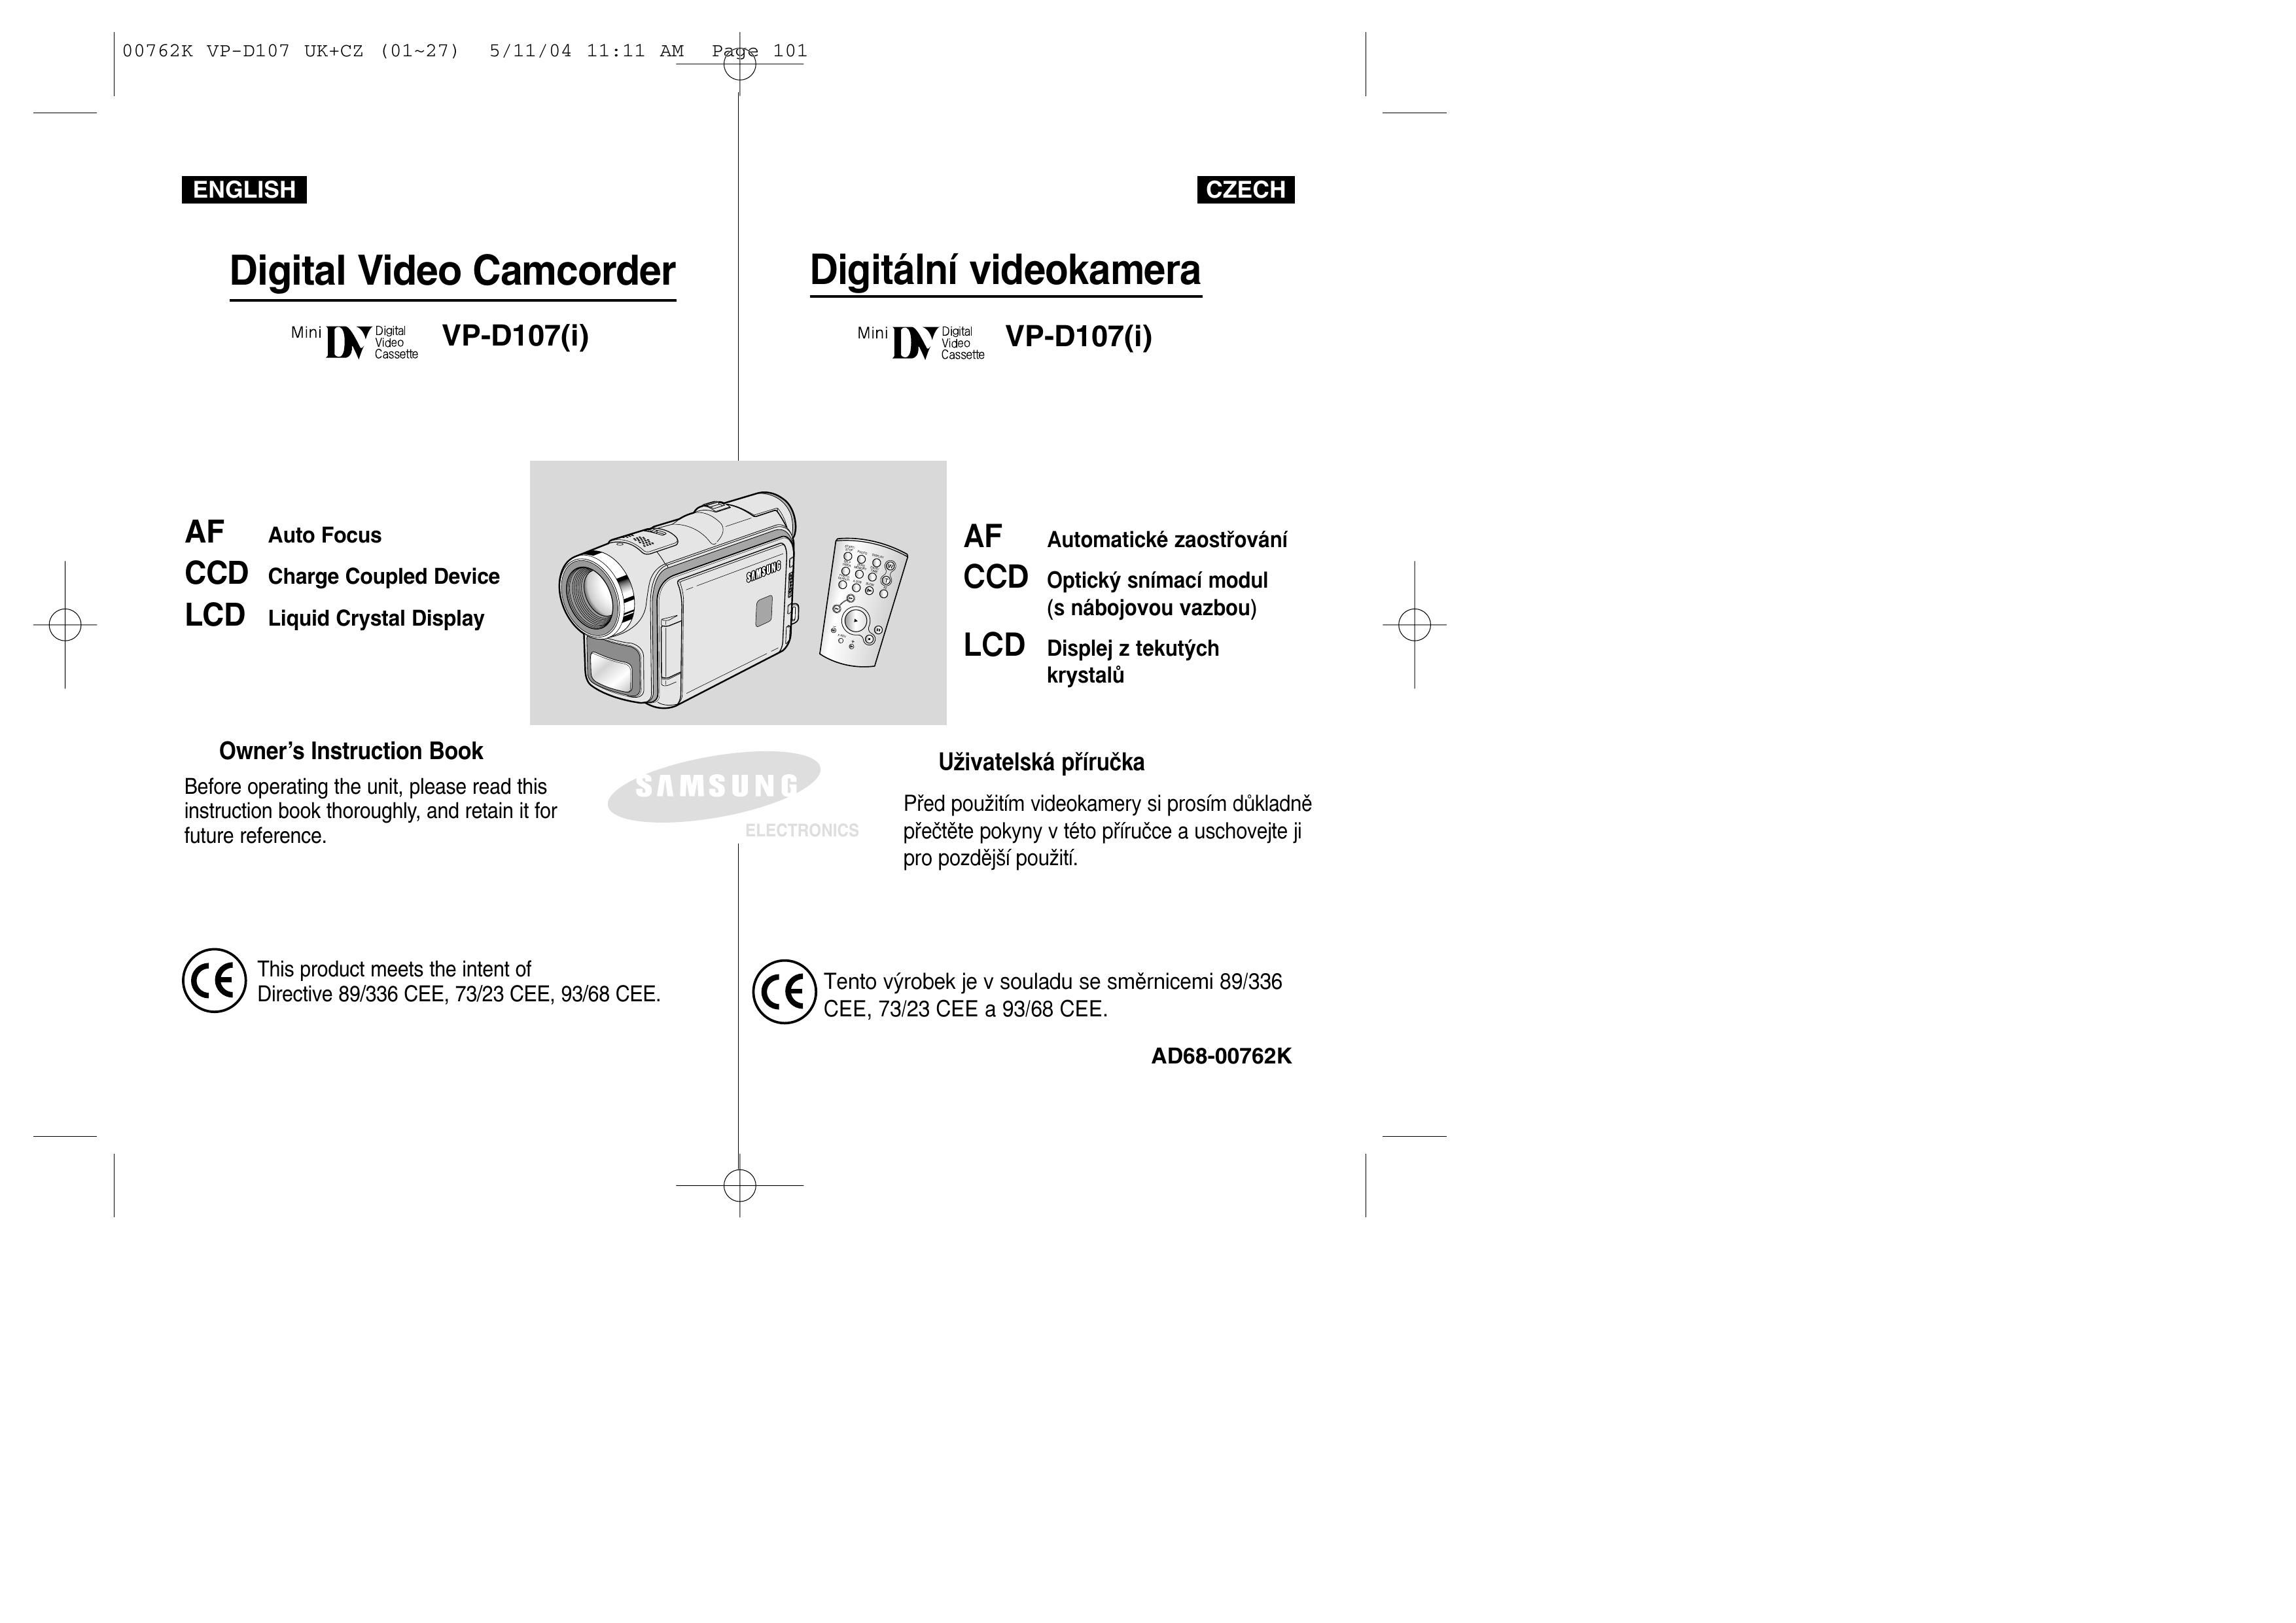 Samsung VP-D107 Camcorder Accessories User Manual